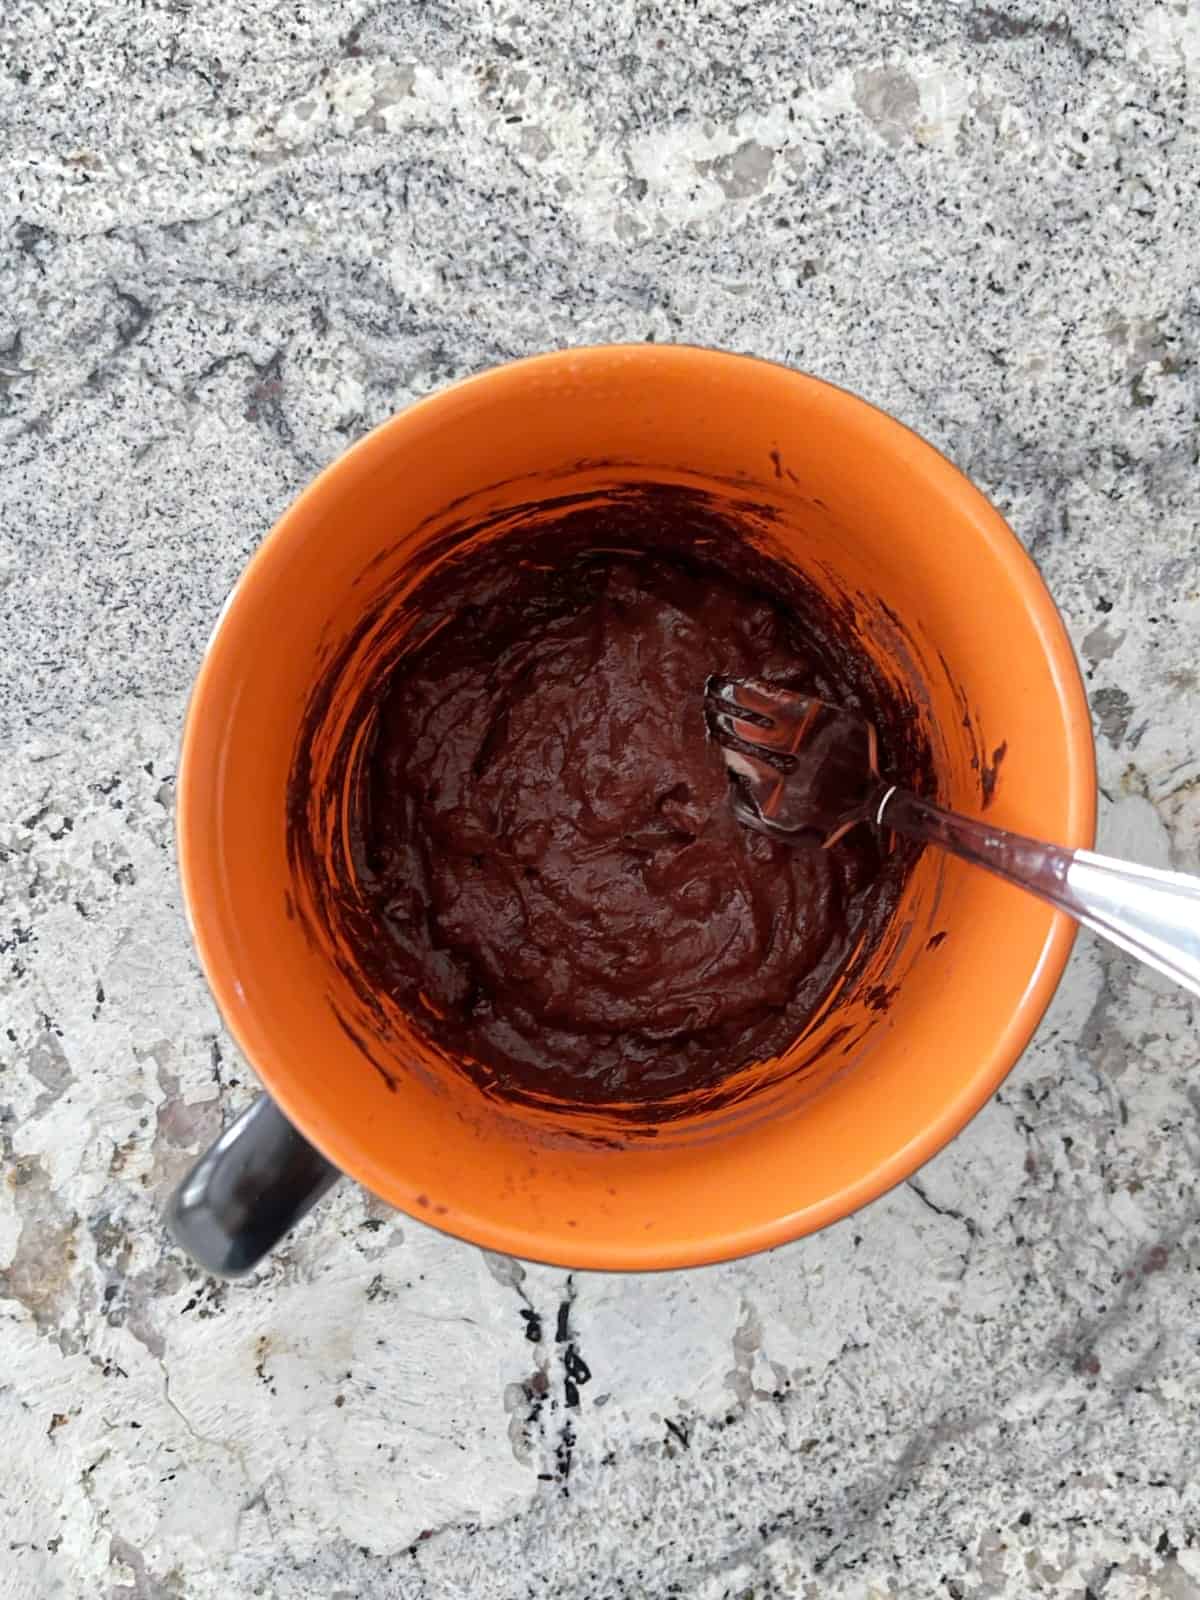 Folding chocolate chips into Black Forest Chocolate Cake batter in orange mug with fork.